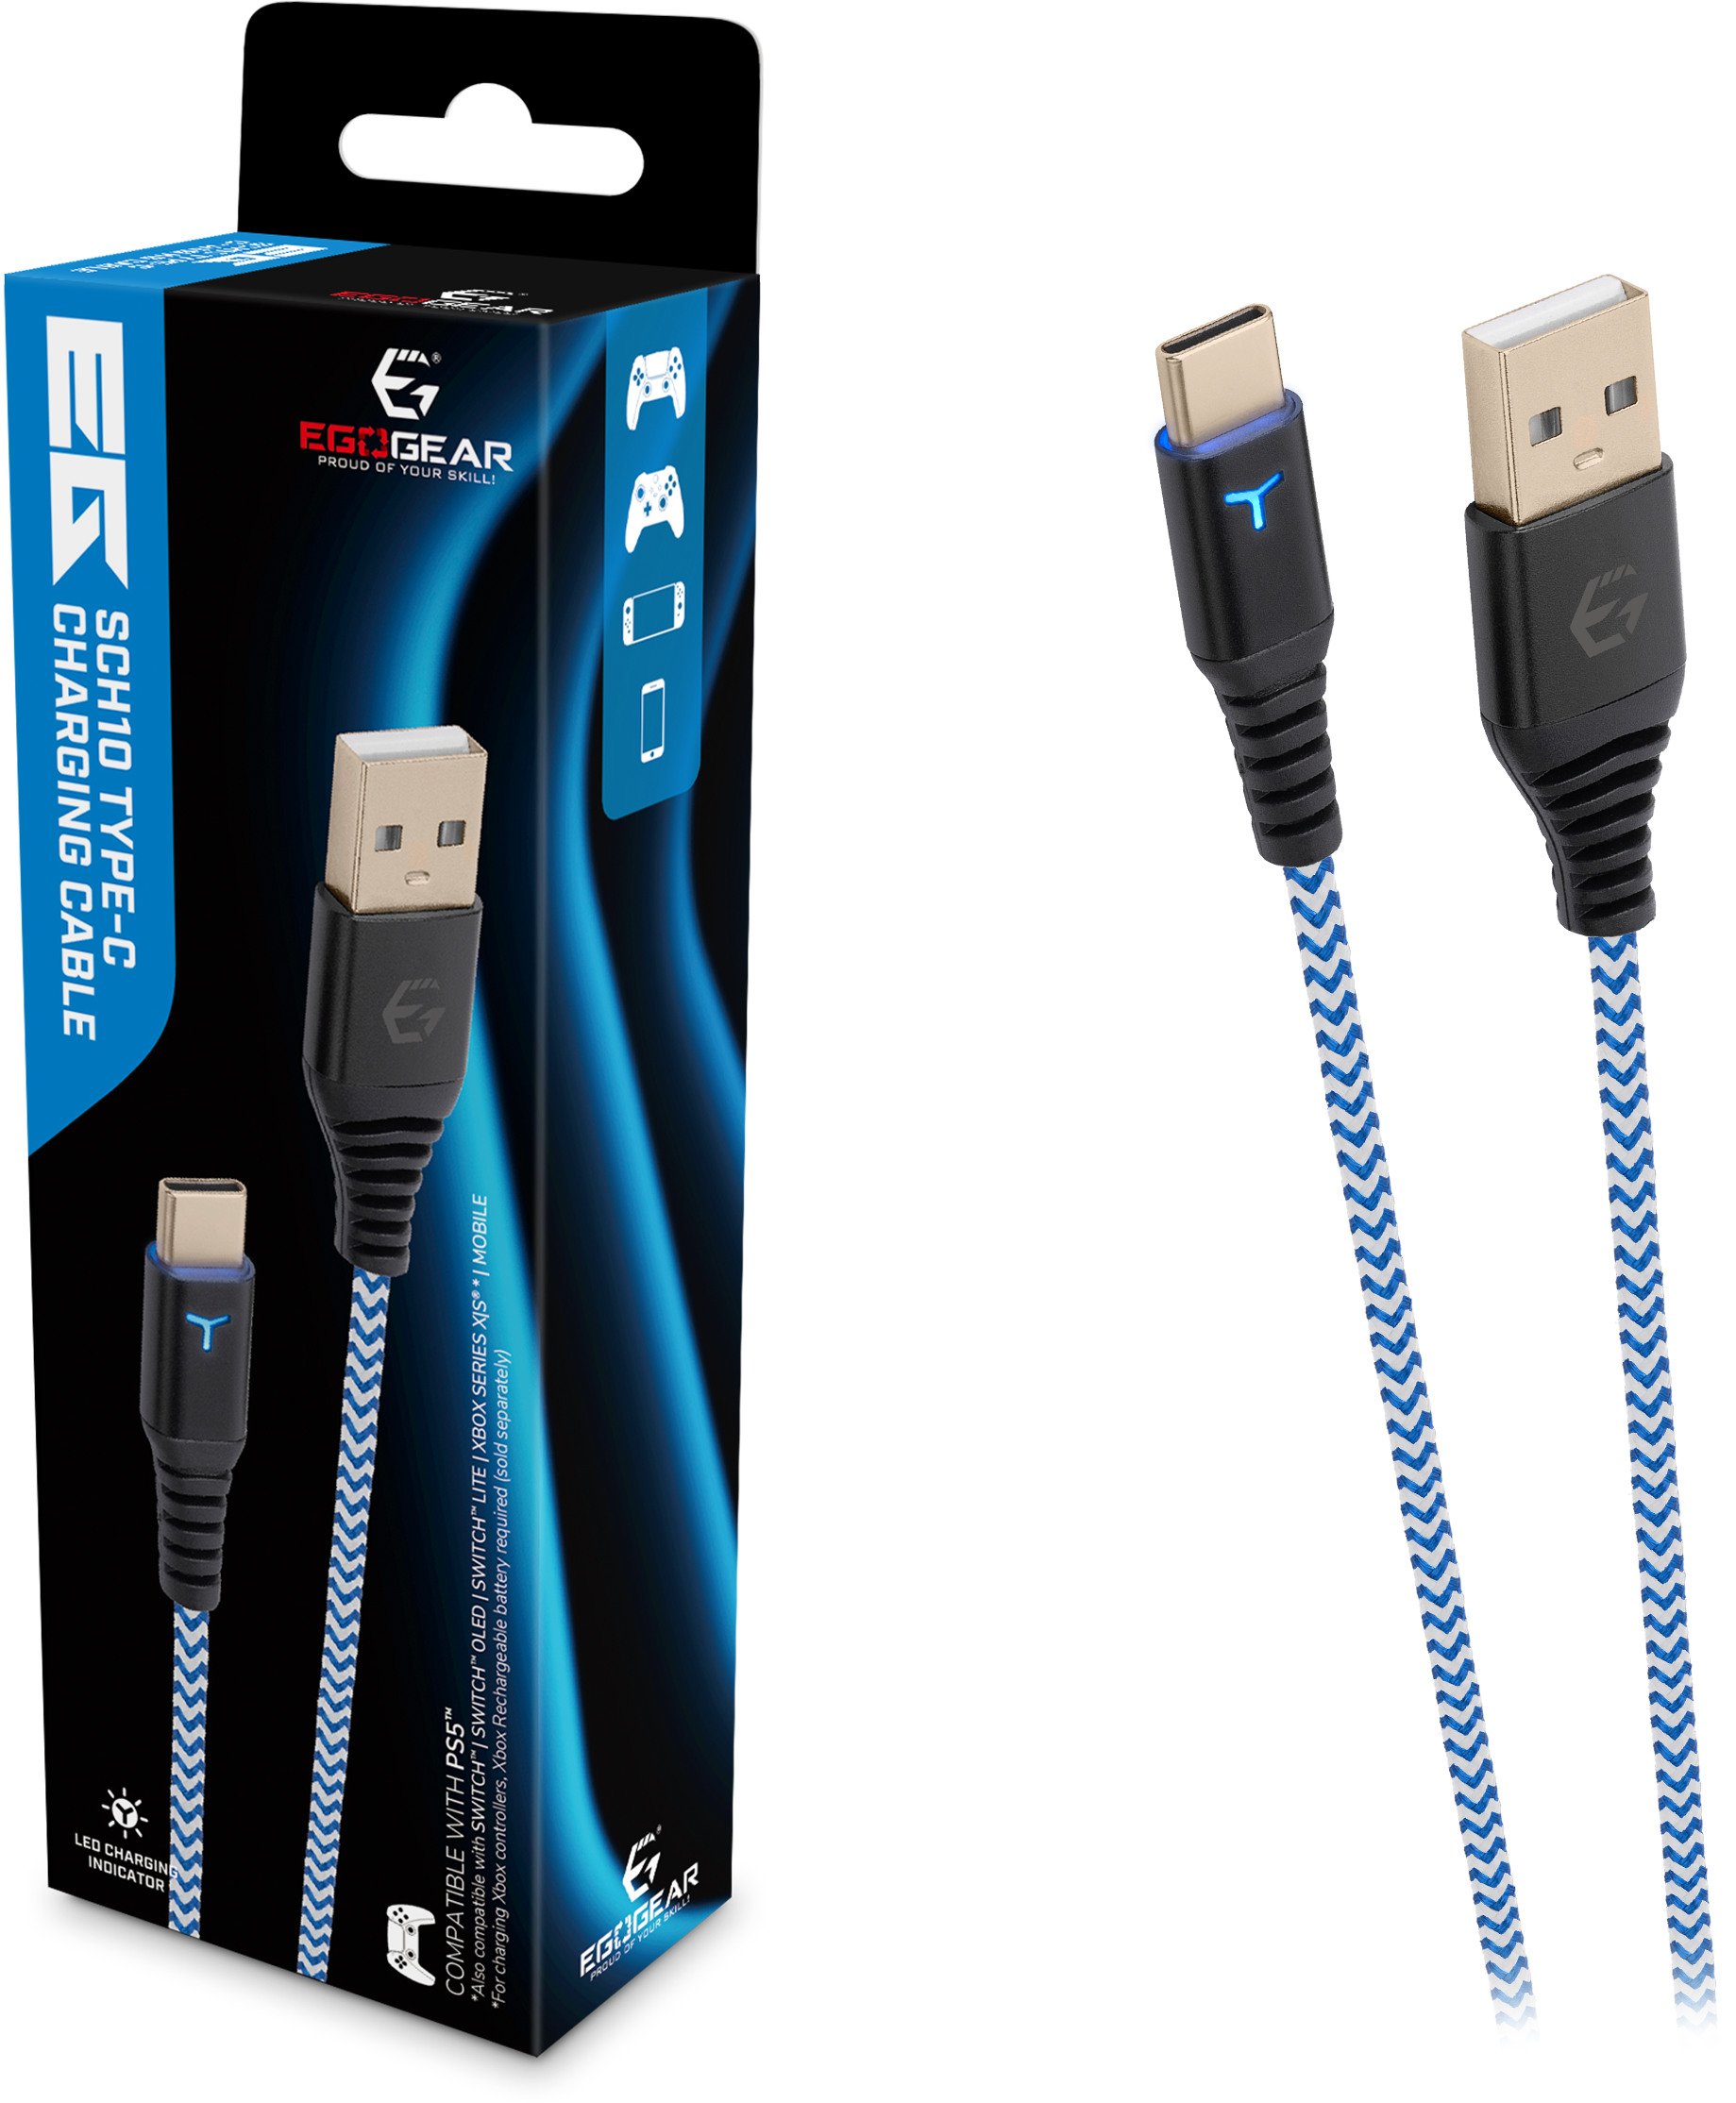 EGOGEAR Charging Cable Type-C 3m SCH10-P5-WH braided, PS5, White,Blue